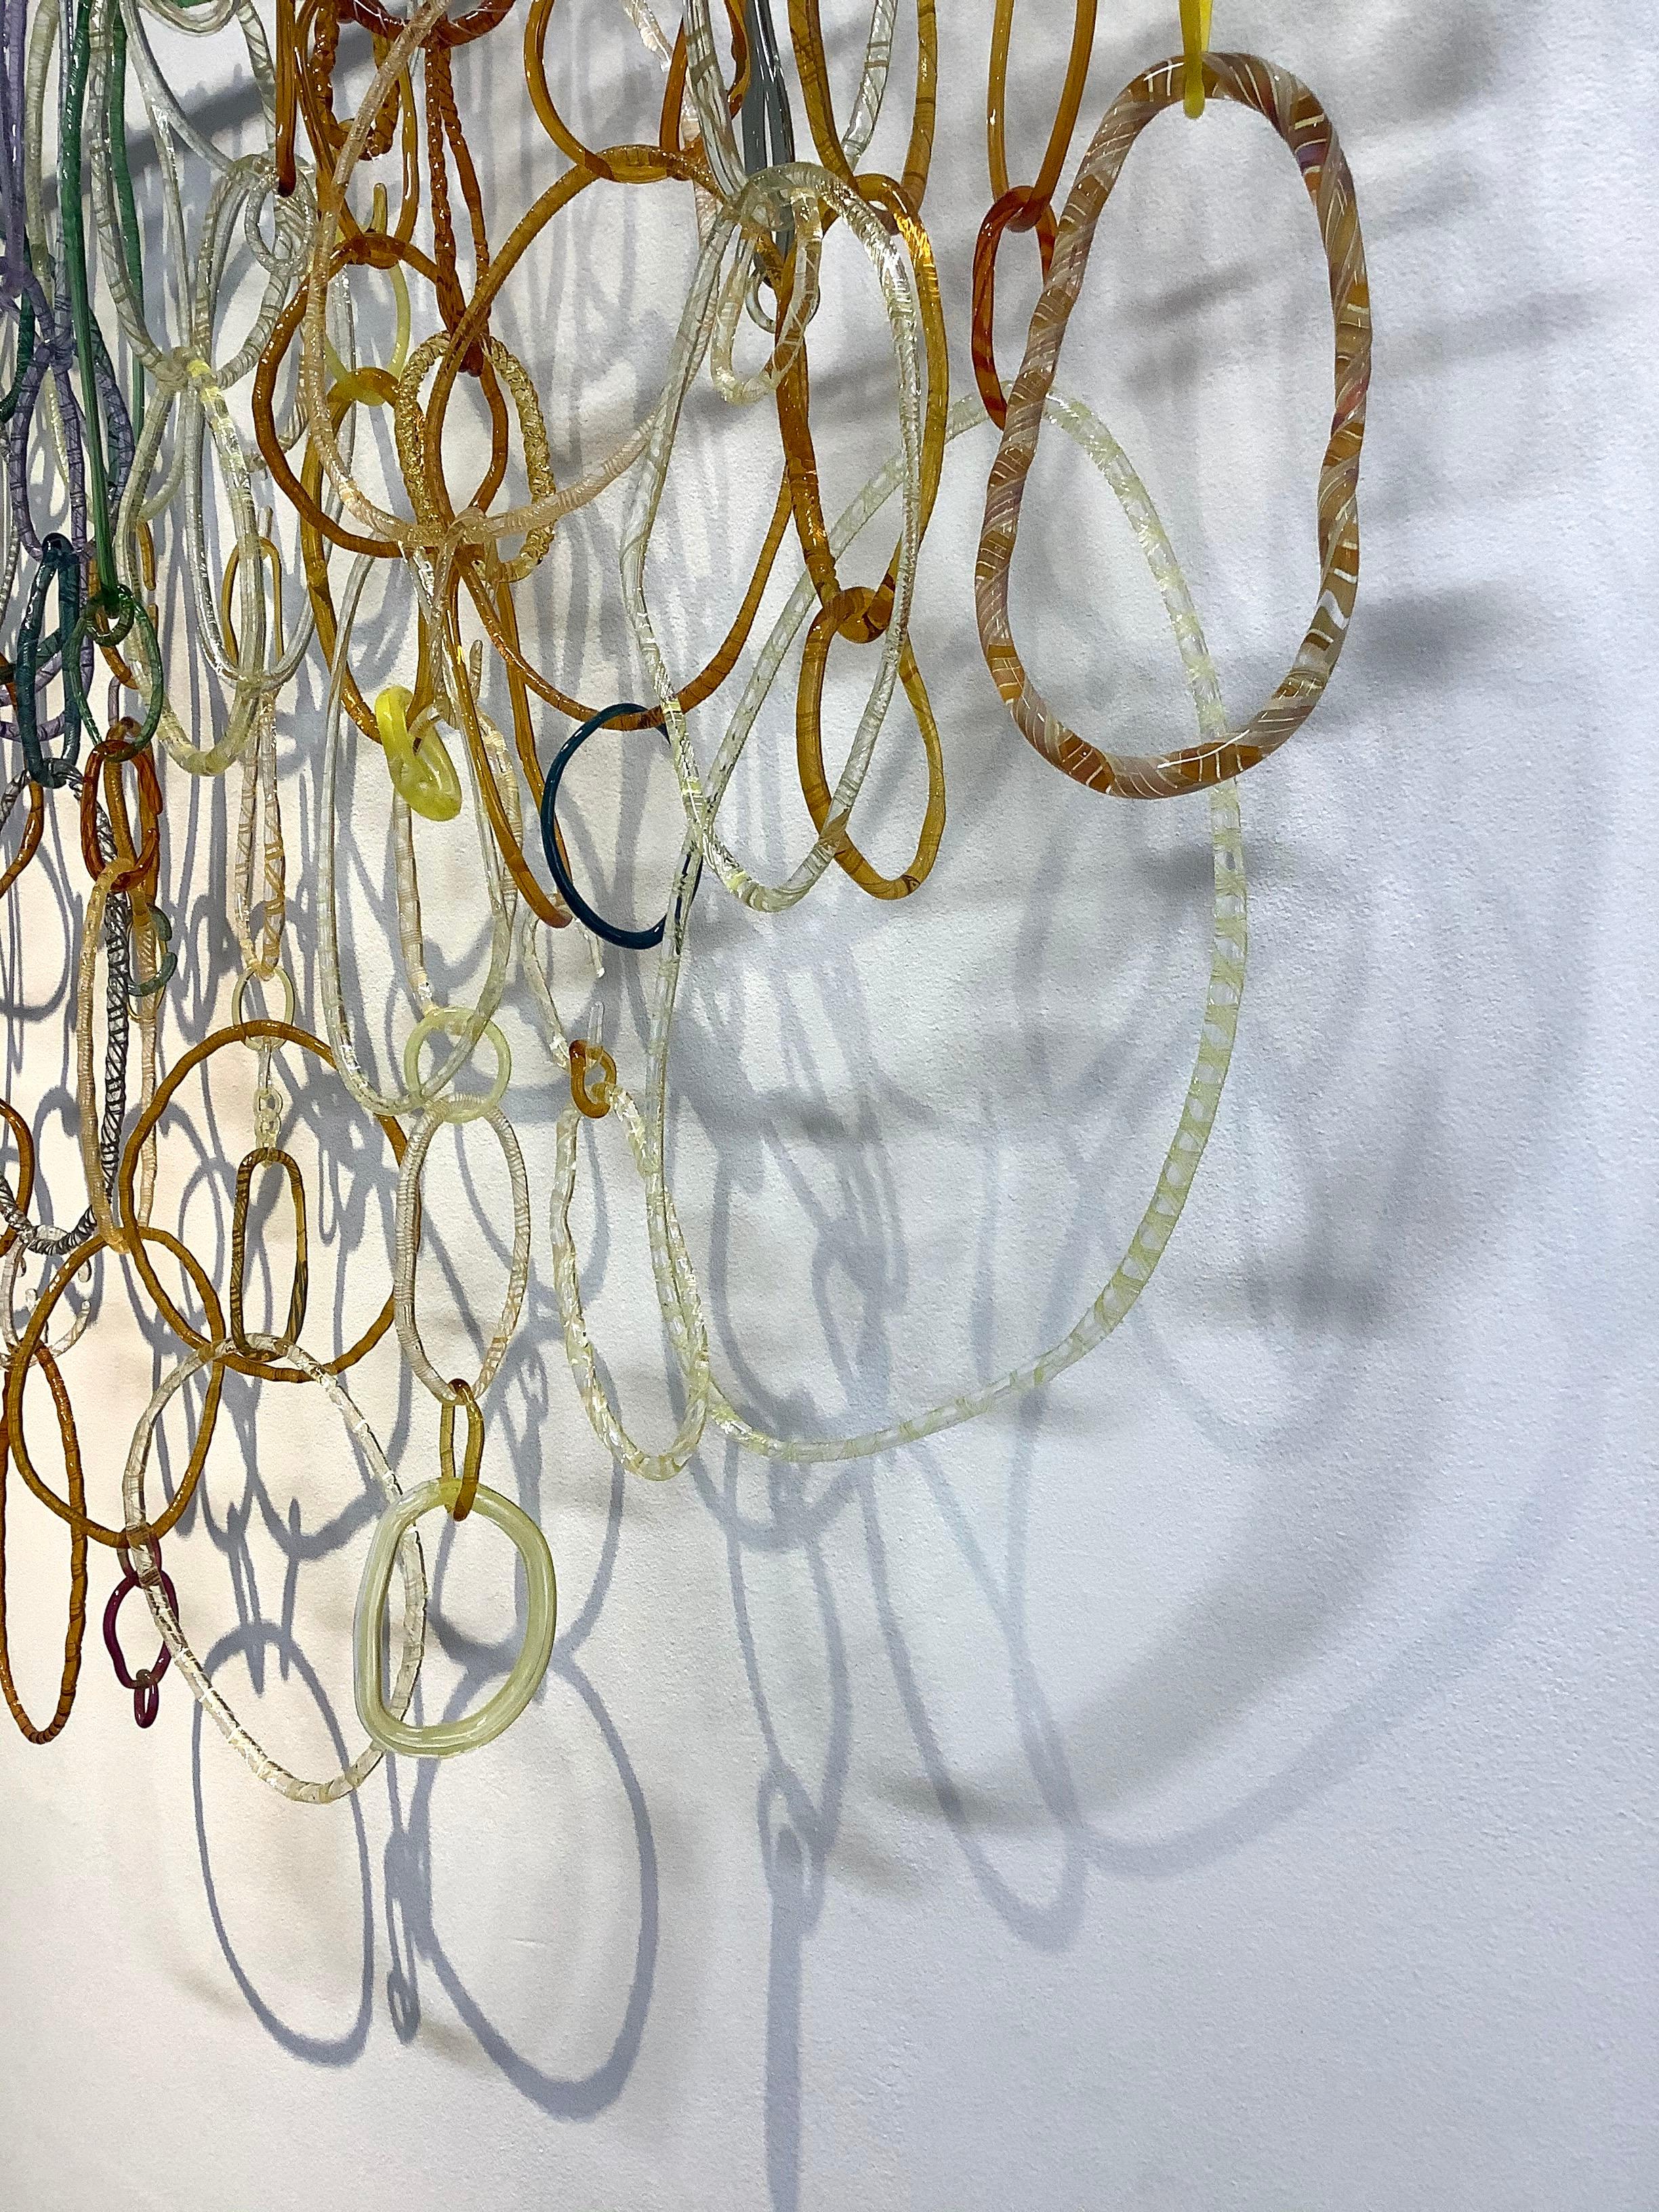 This hanging sculpture by David Licata is composed of free-form circular and oval loops of torch-worked borosilicate glass in golden orange, light green, cobalt blue, pale yellow, and pale lavender. The loops, in varying sizes and textures, cascade